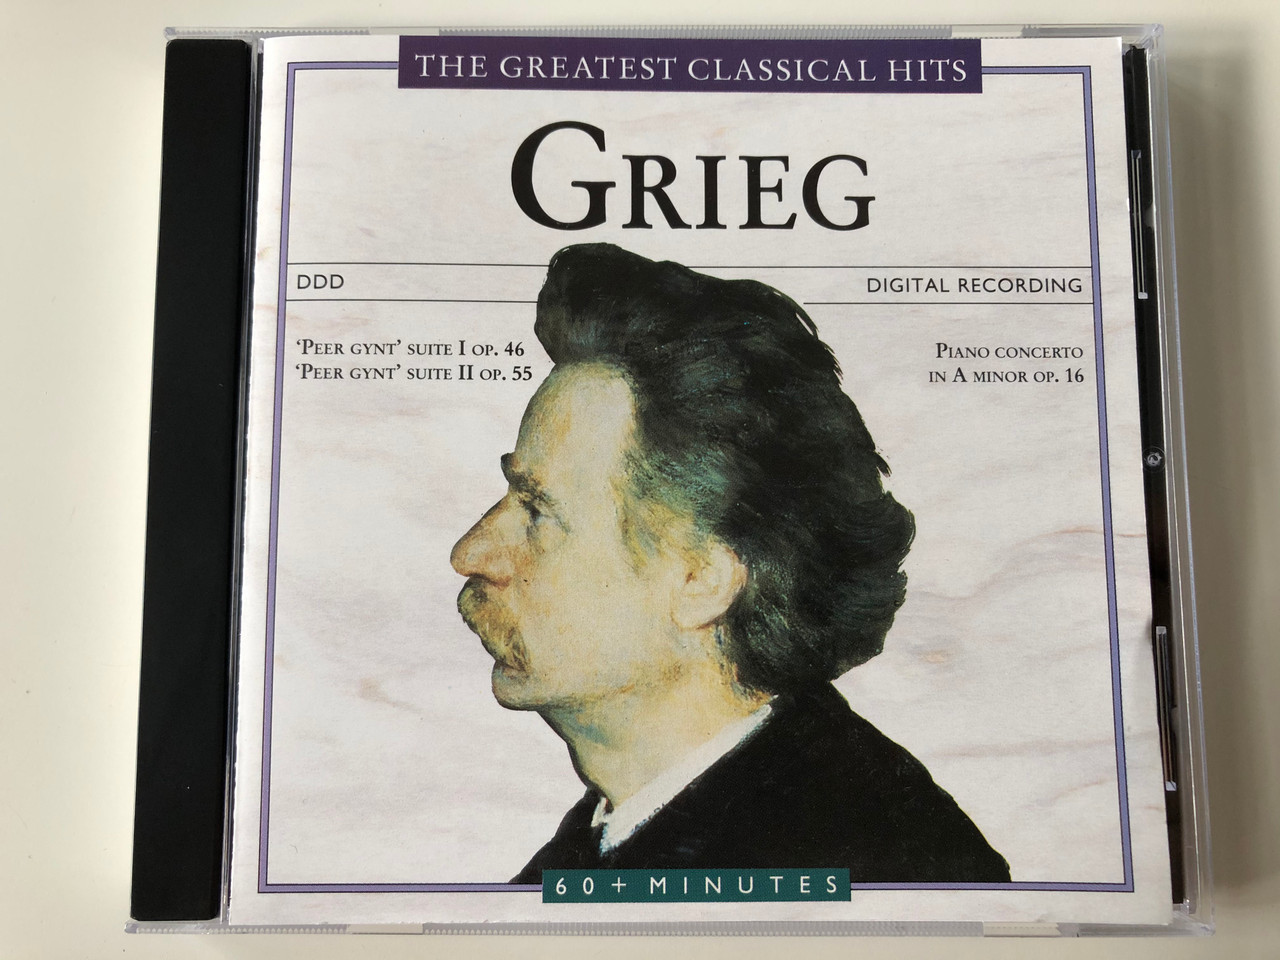 The Greatest Classical Hits: Grieg 'Peer Gynt' Suite I Op. 46, 'Peer  Gynt' Suite II Op. 55, Piano Concerto In A Minor Op. 16 Selcor Ltd.  ‎Audio CD 1991 Stereo GCH 2401 bibleinmylanguage